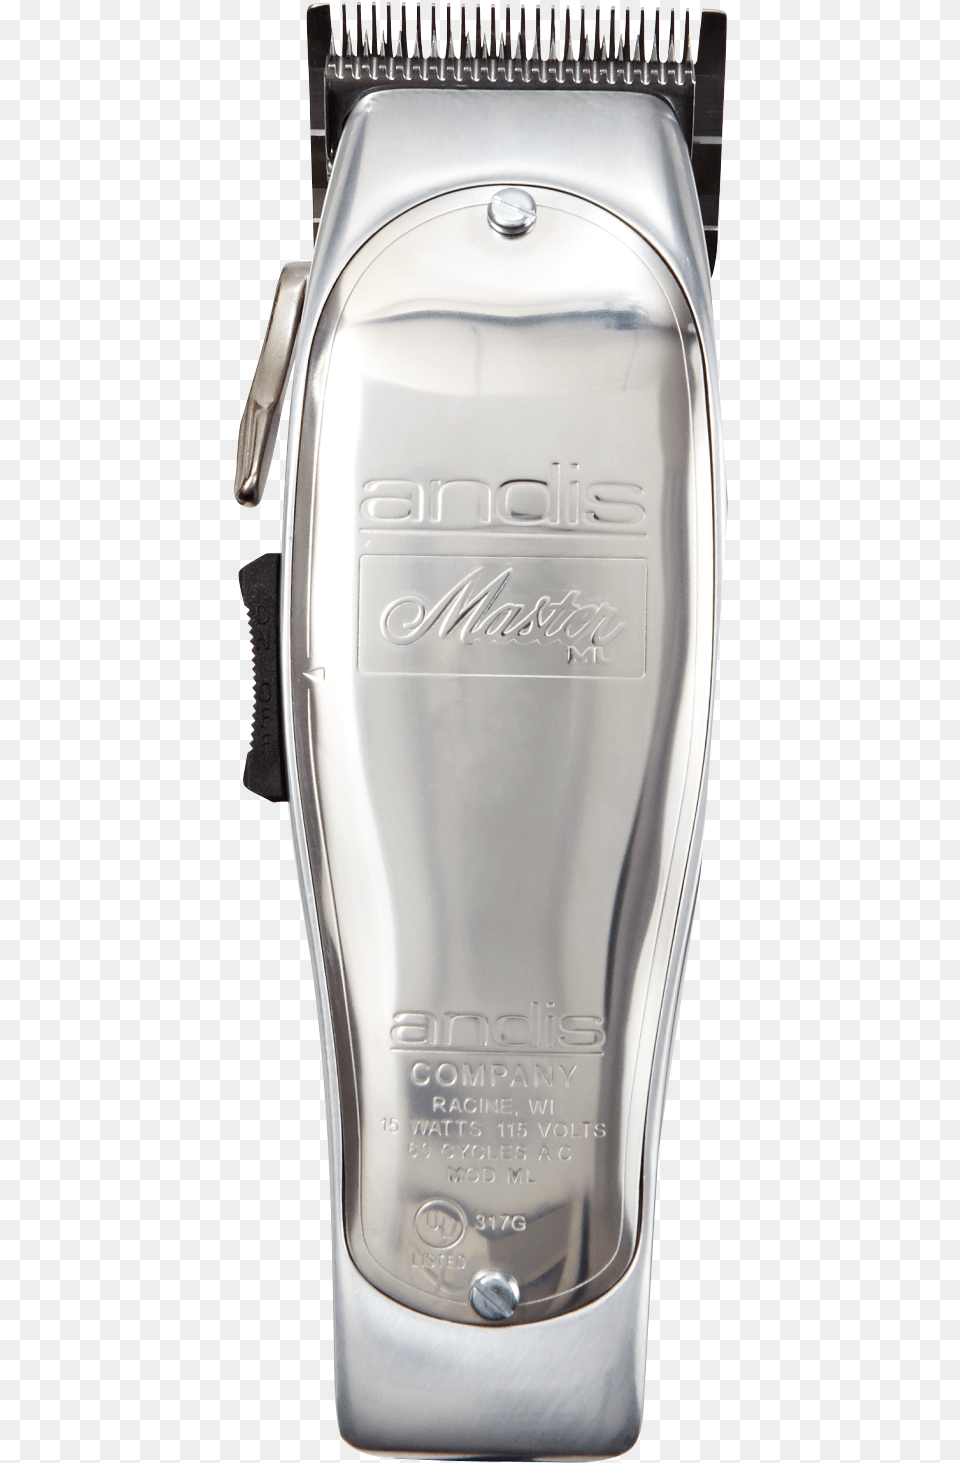 Andis Master Clippers Cordless, Electronics, Mobile Phone, Phone Png Image